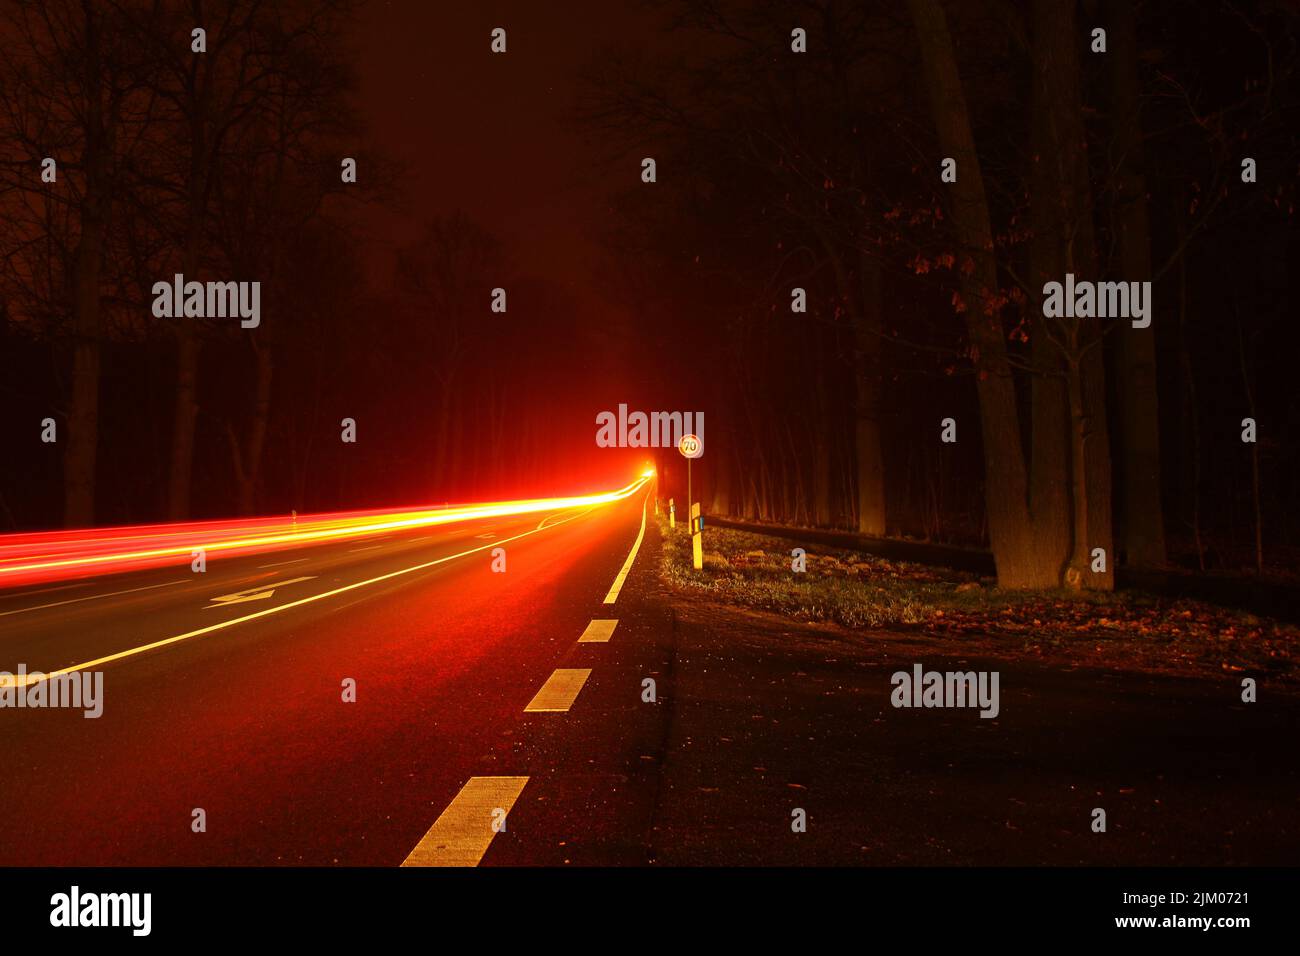 The long exposure of red lights on a highway in the forest in the evening Stock Photo